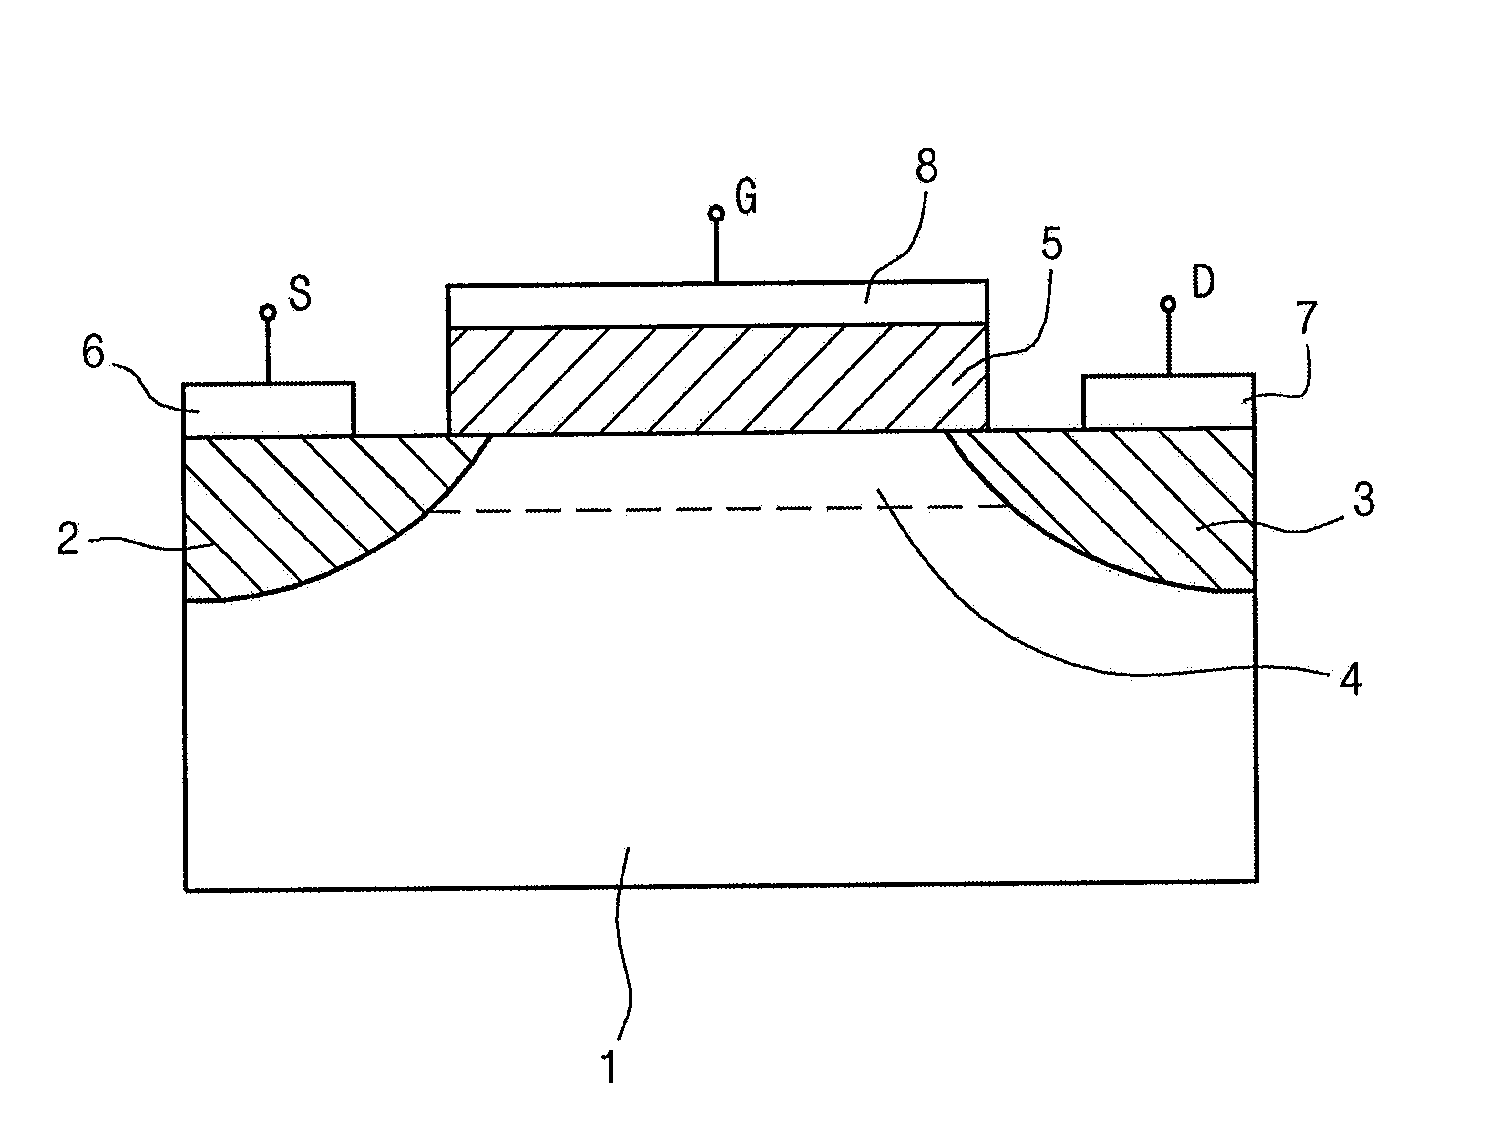 Ferroelectric material and method of forming ferroelectric layer using the same